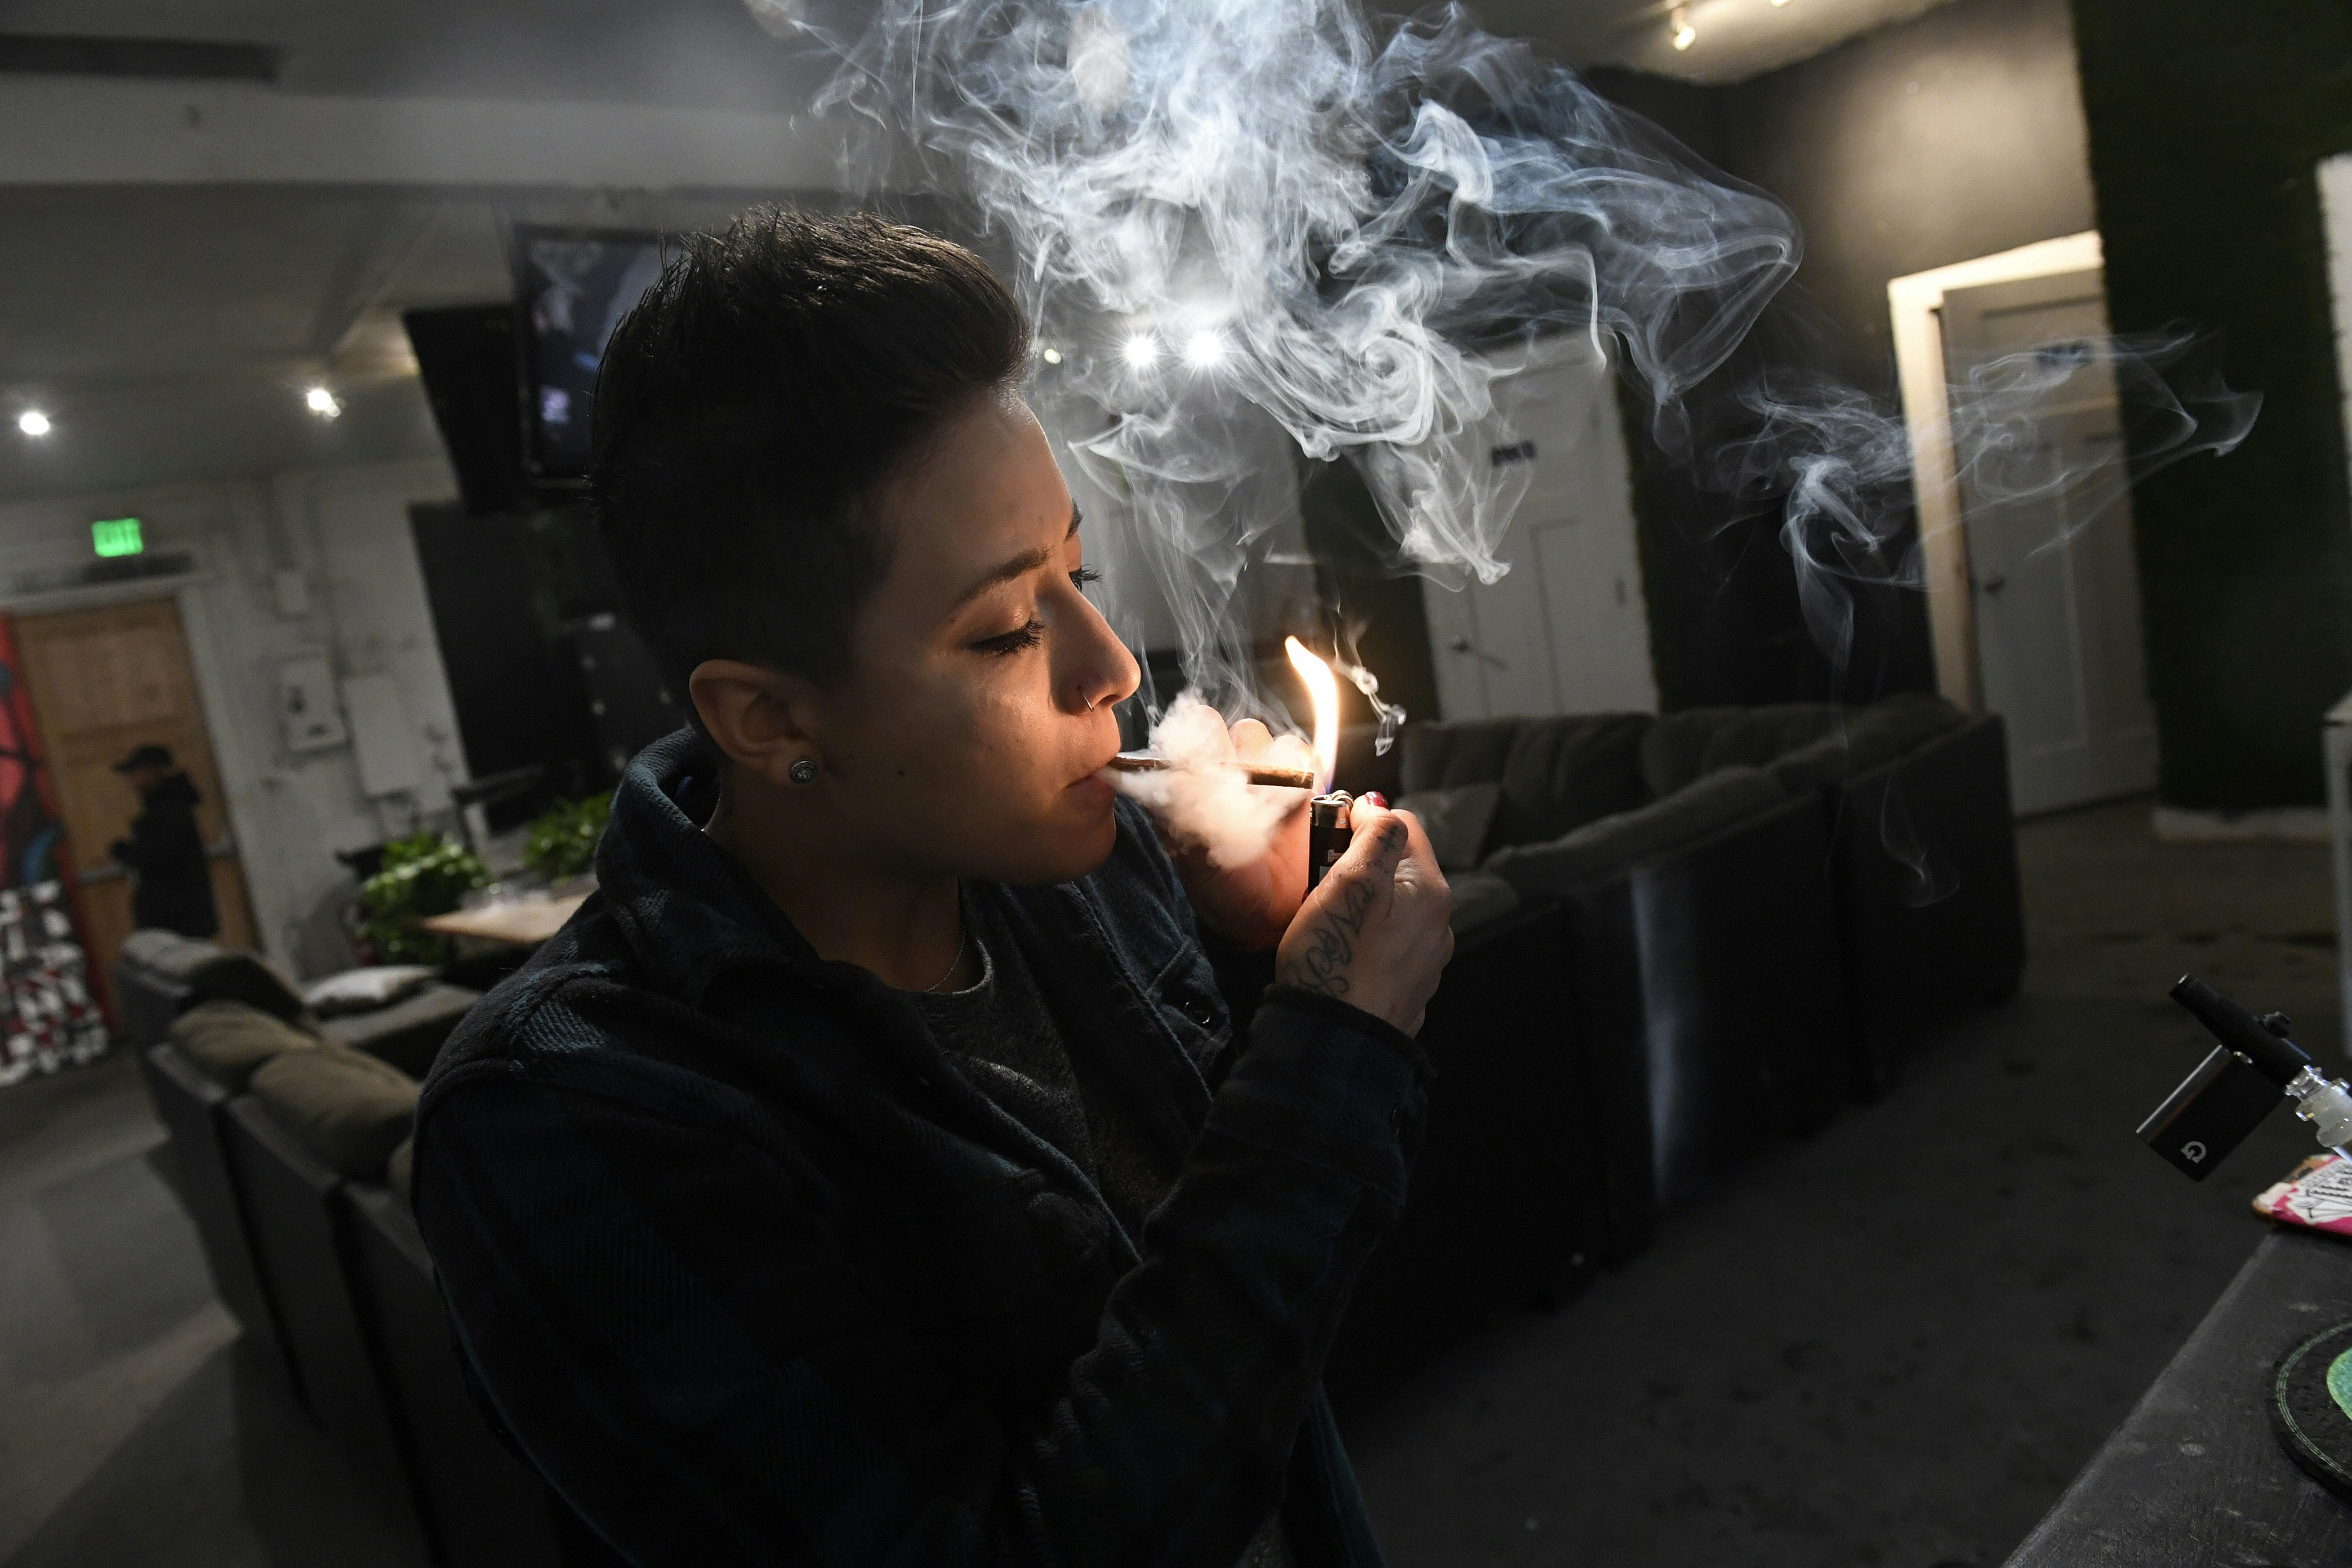 A manager at Tetra Private Lounge and Garden lights a joint. The flame illuminates her face and the wreath of white and grey smoke coming from the joint. Behind her is the comfortable, living-room like lounge area with big couches and doors leading to other parts of the club